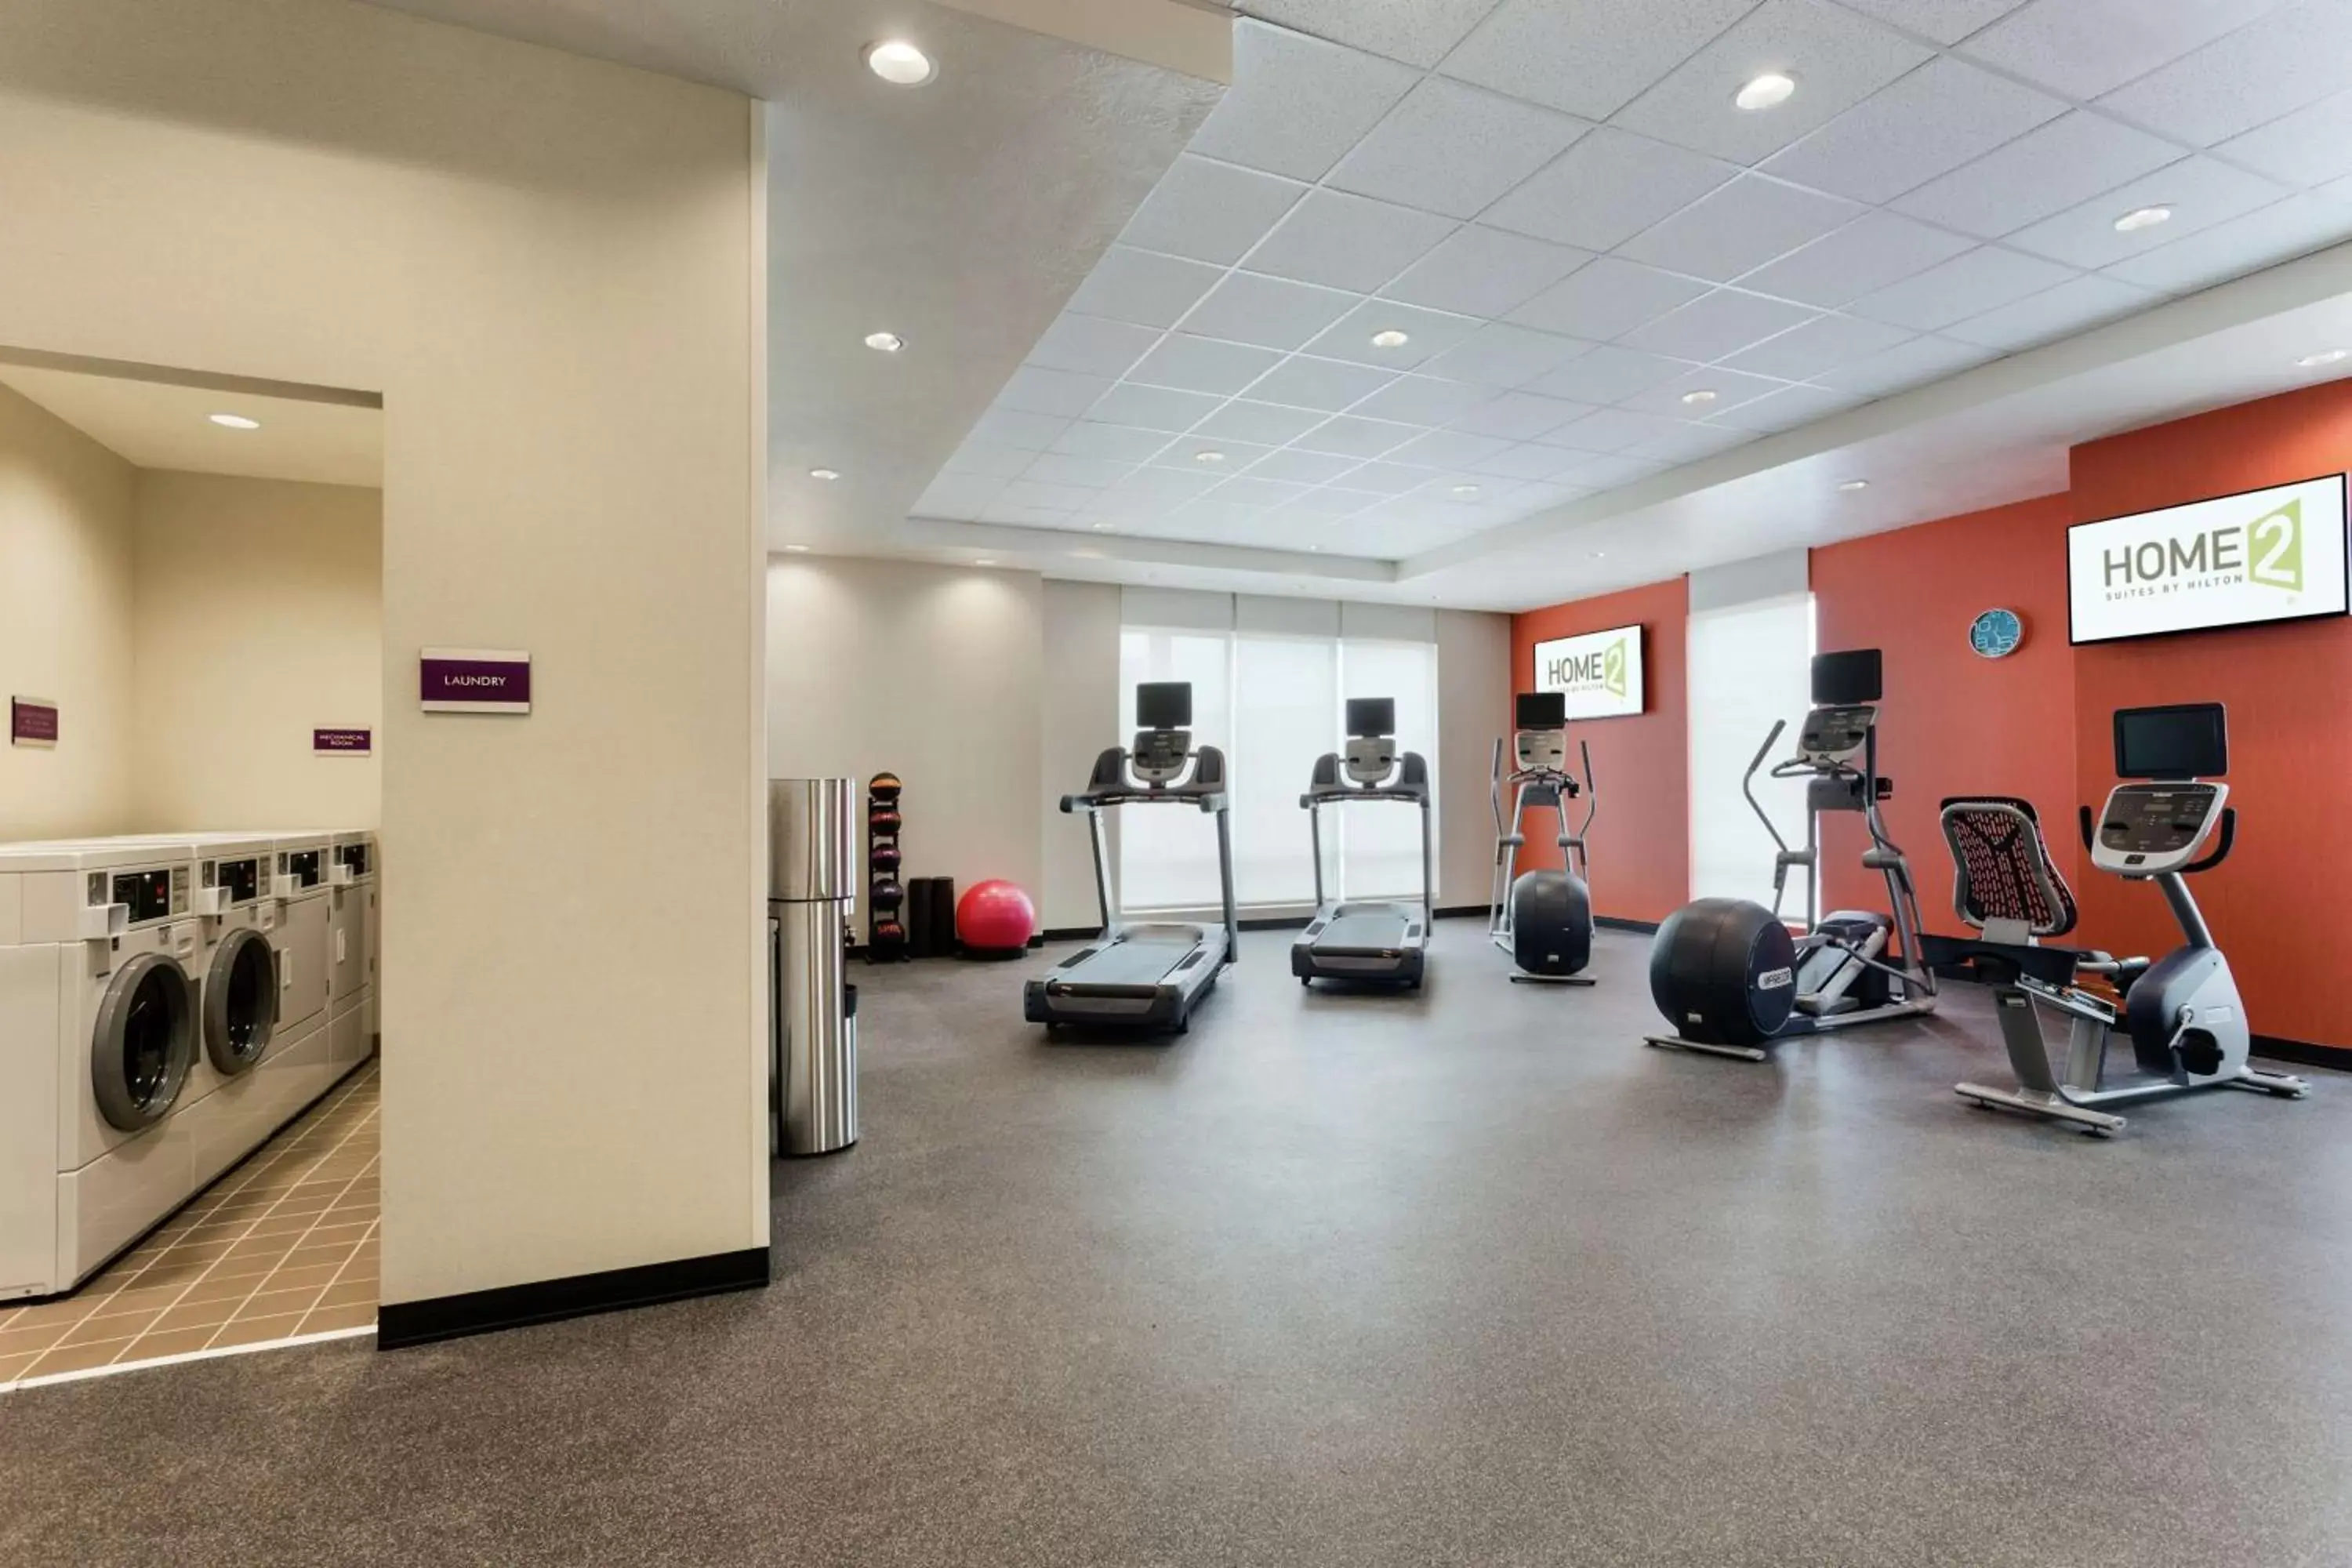 Fitness centre/facilities, Fitness Center/Facilities in Home2 Suites by Hilton Salt Lake City-Murray, UT